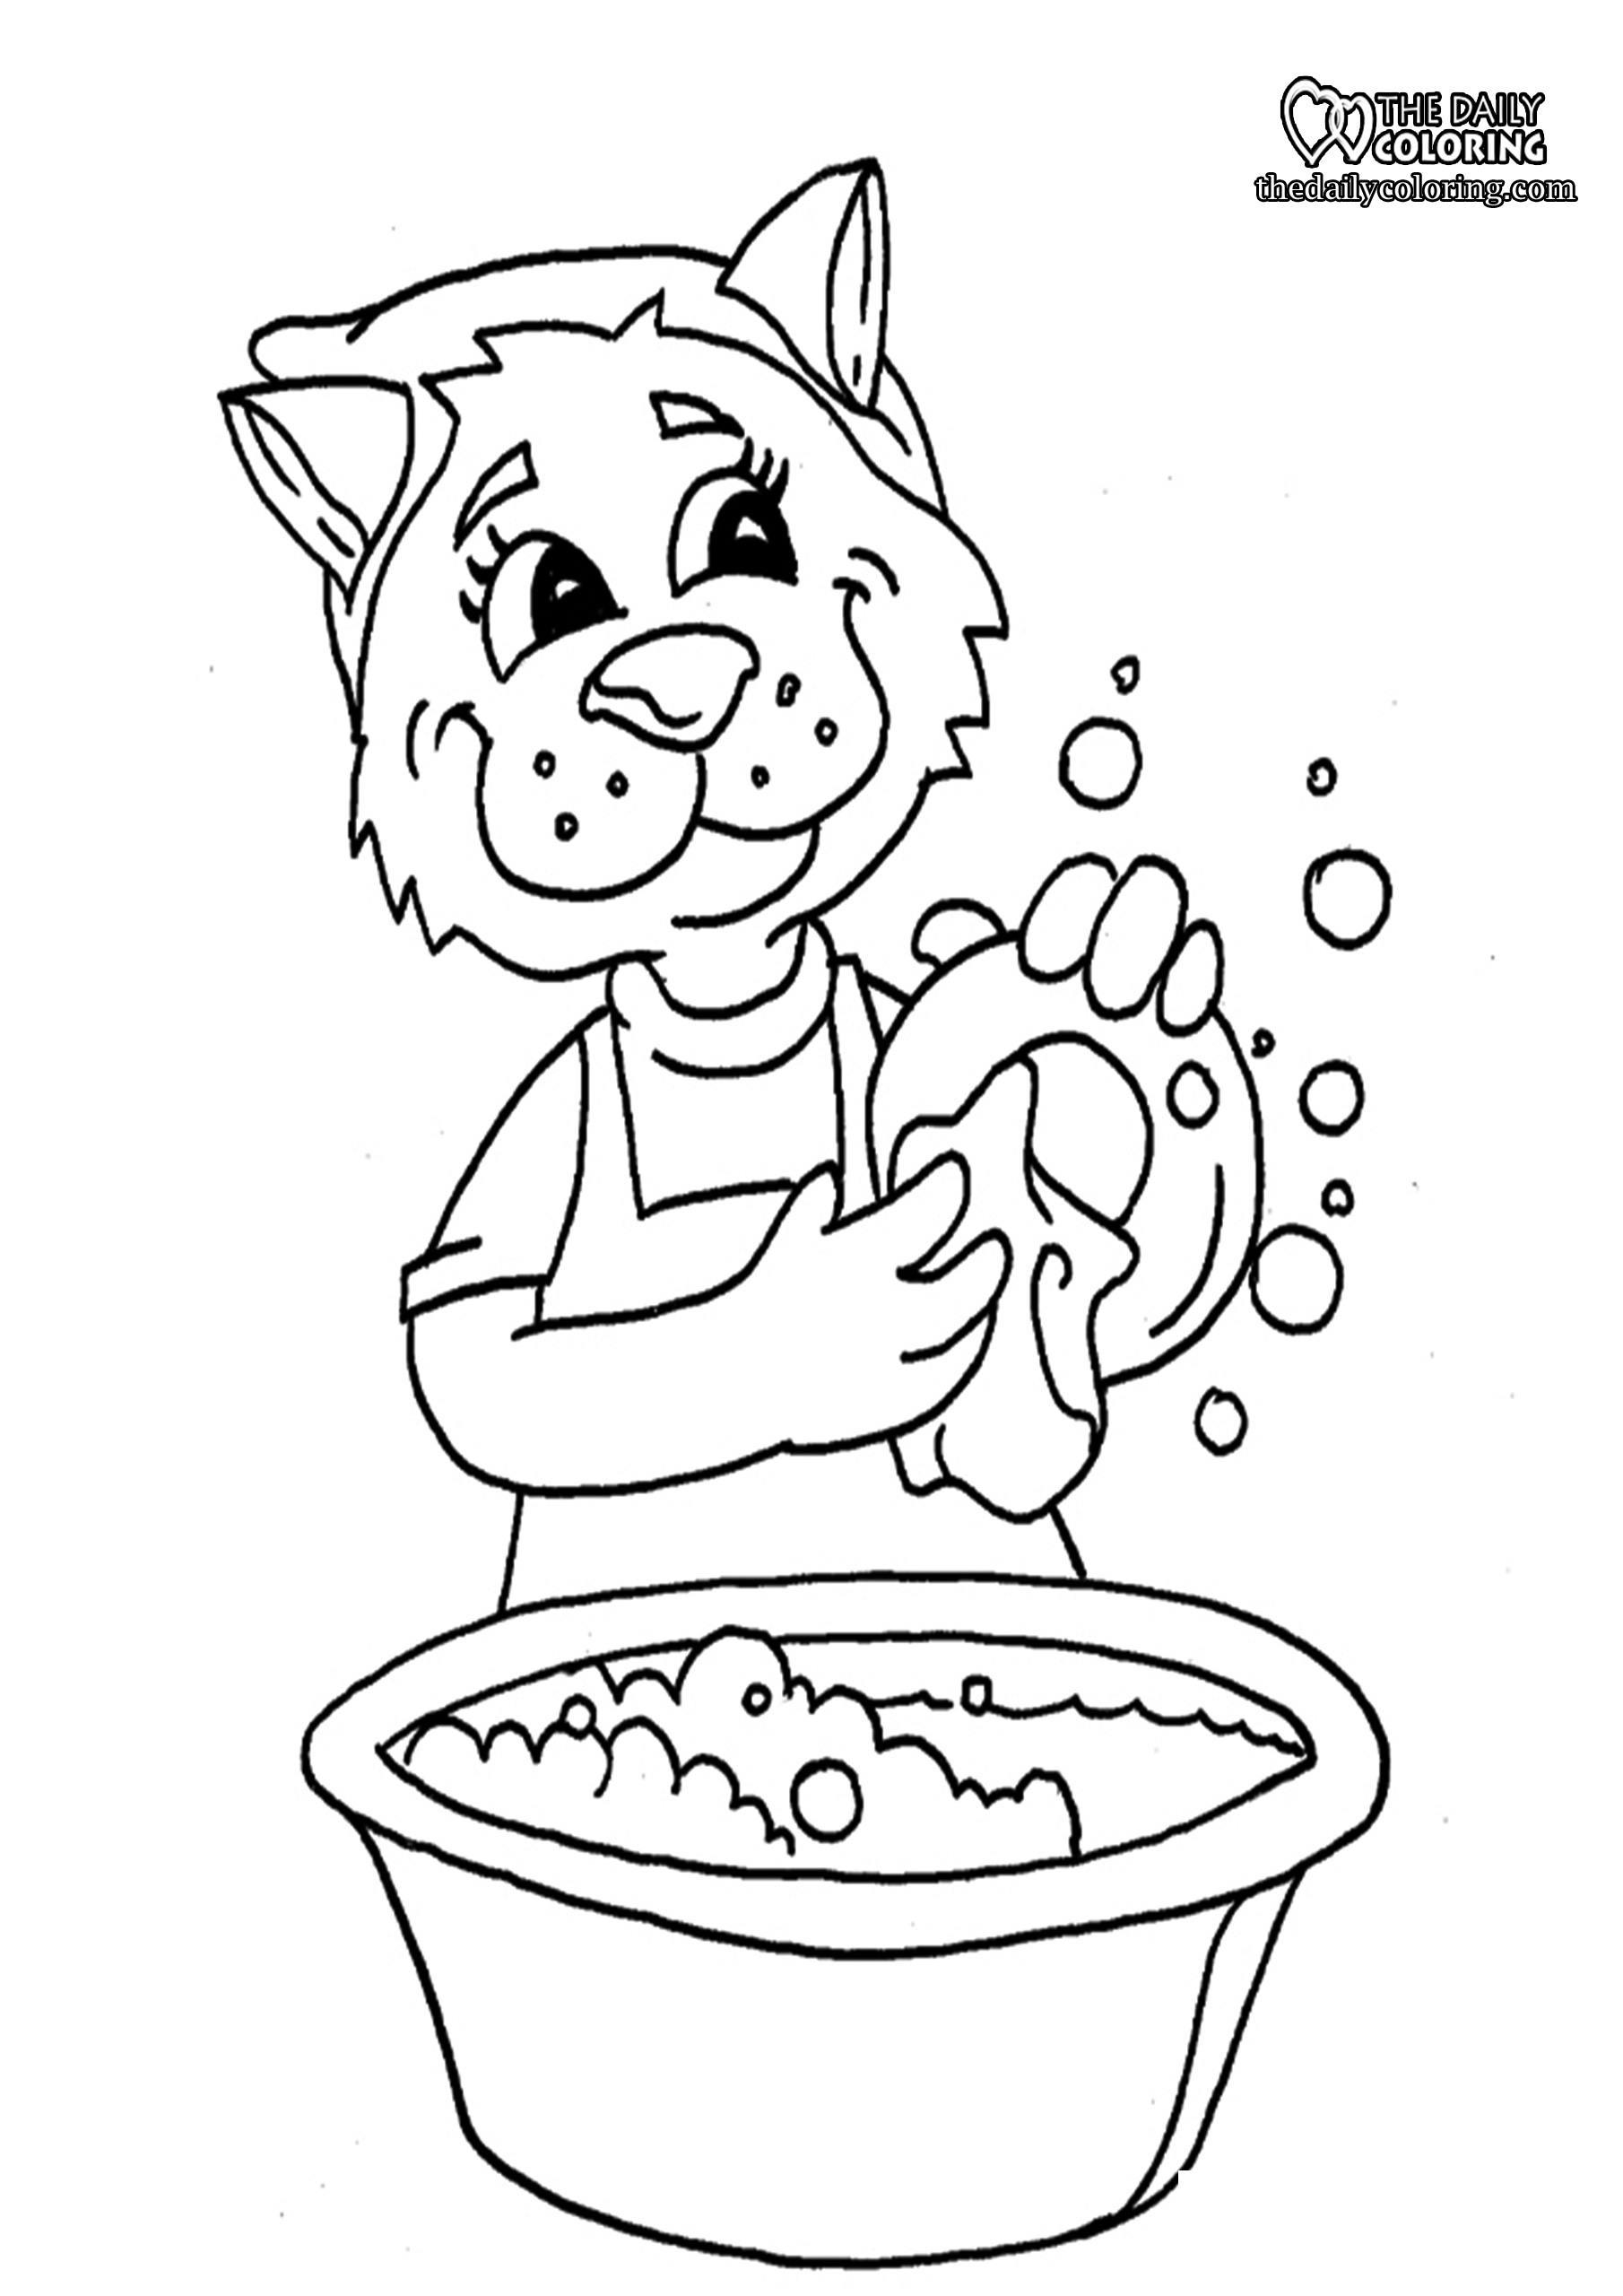 cleaning-coloring-pages